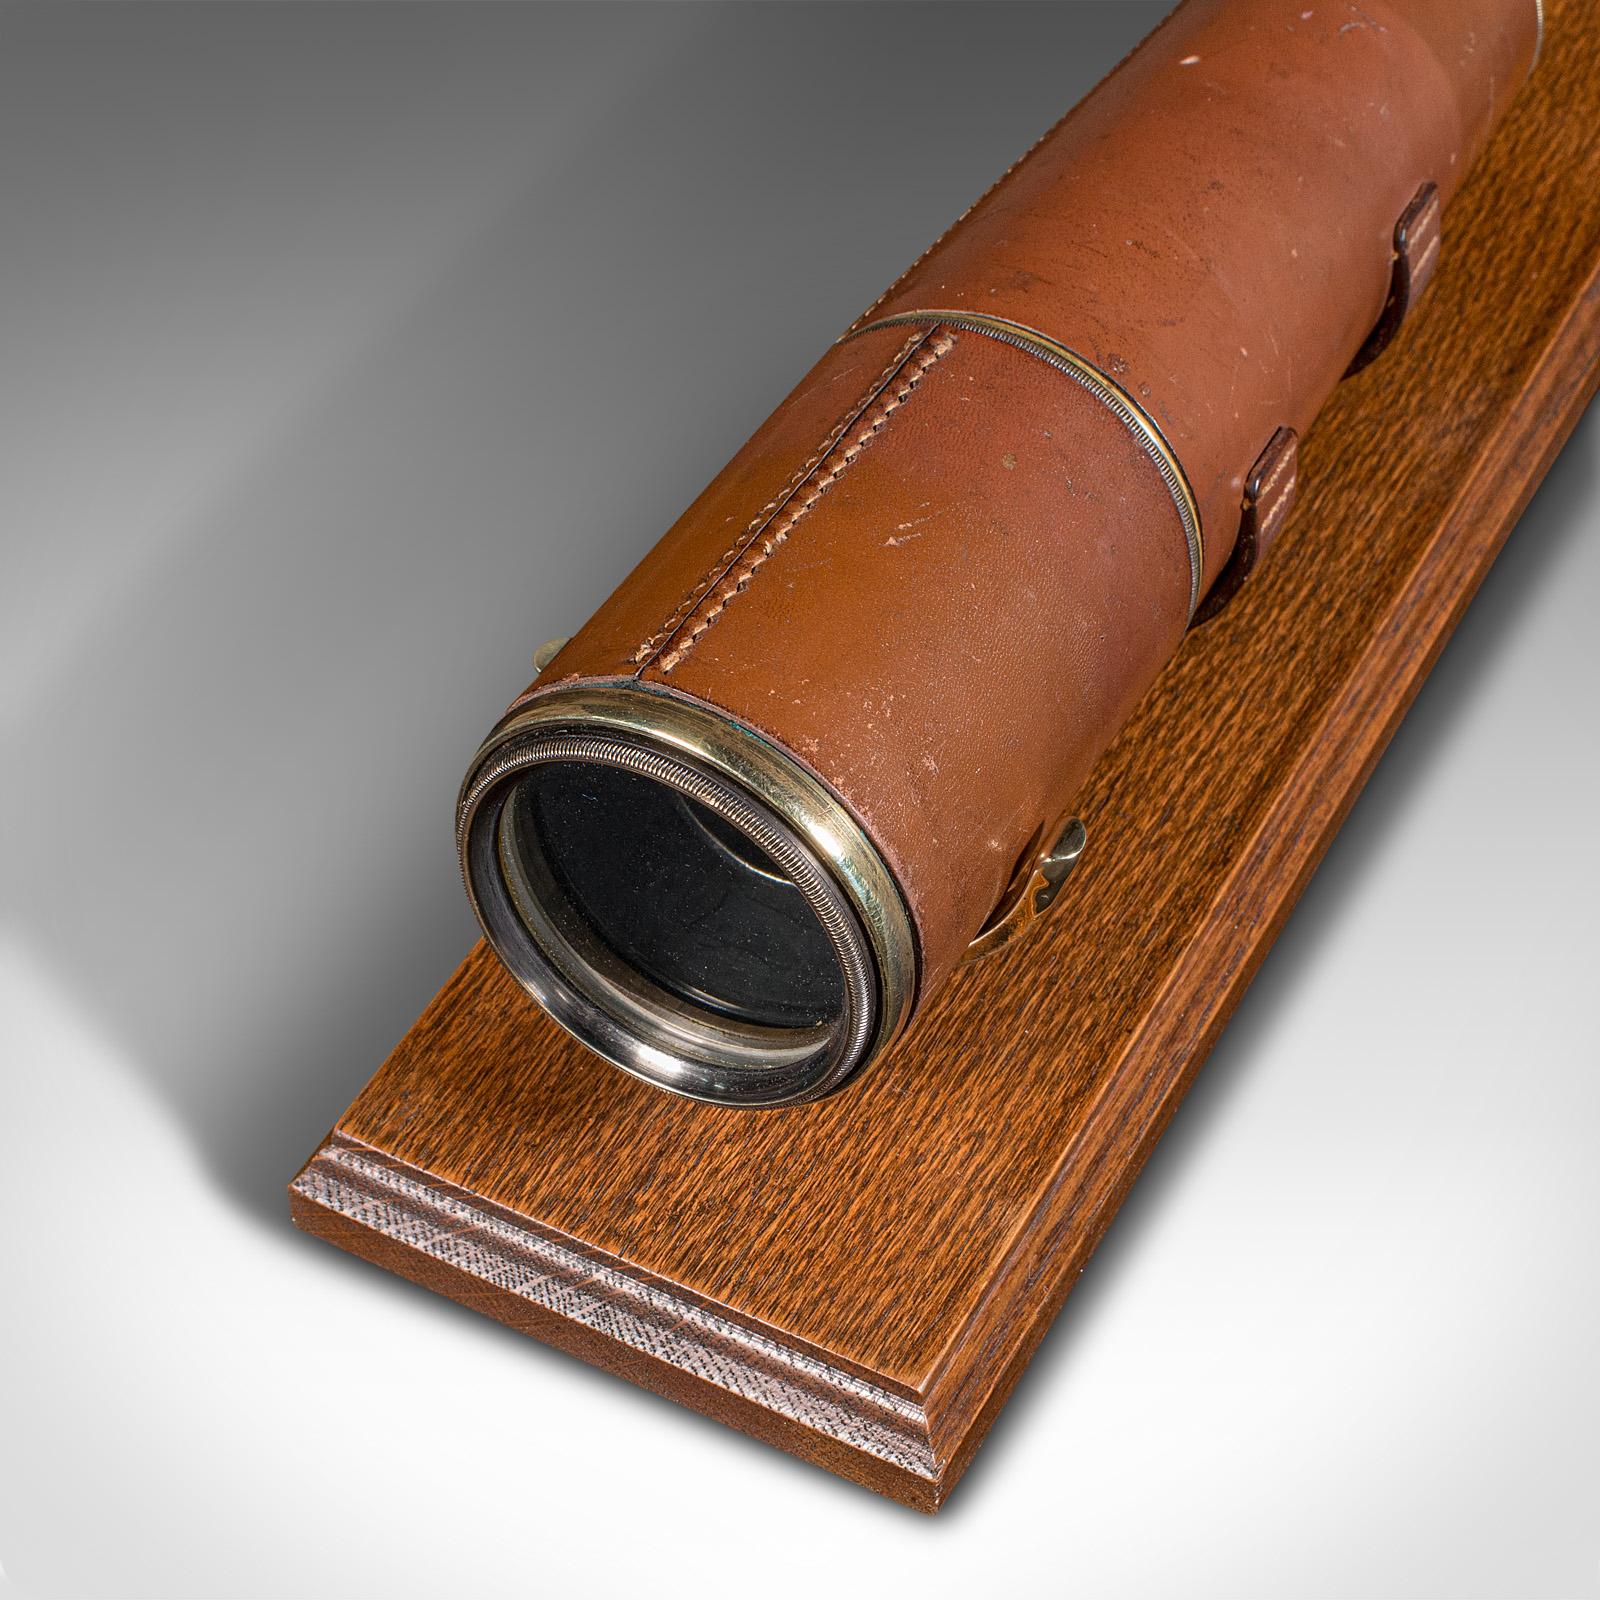 Antique 3 Draw Telescope, English, Brass, Leather, Terrestrial, Astro, Great War For Sale 4